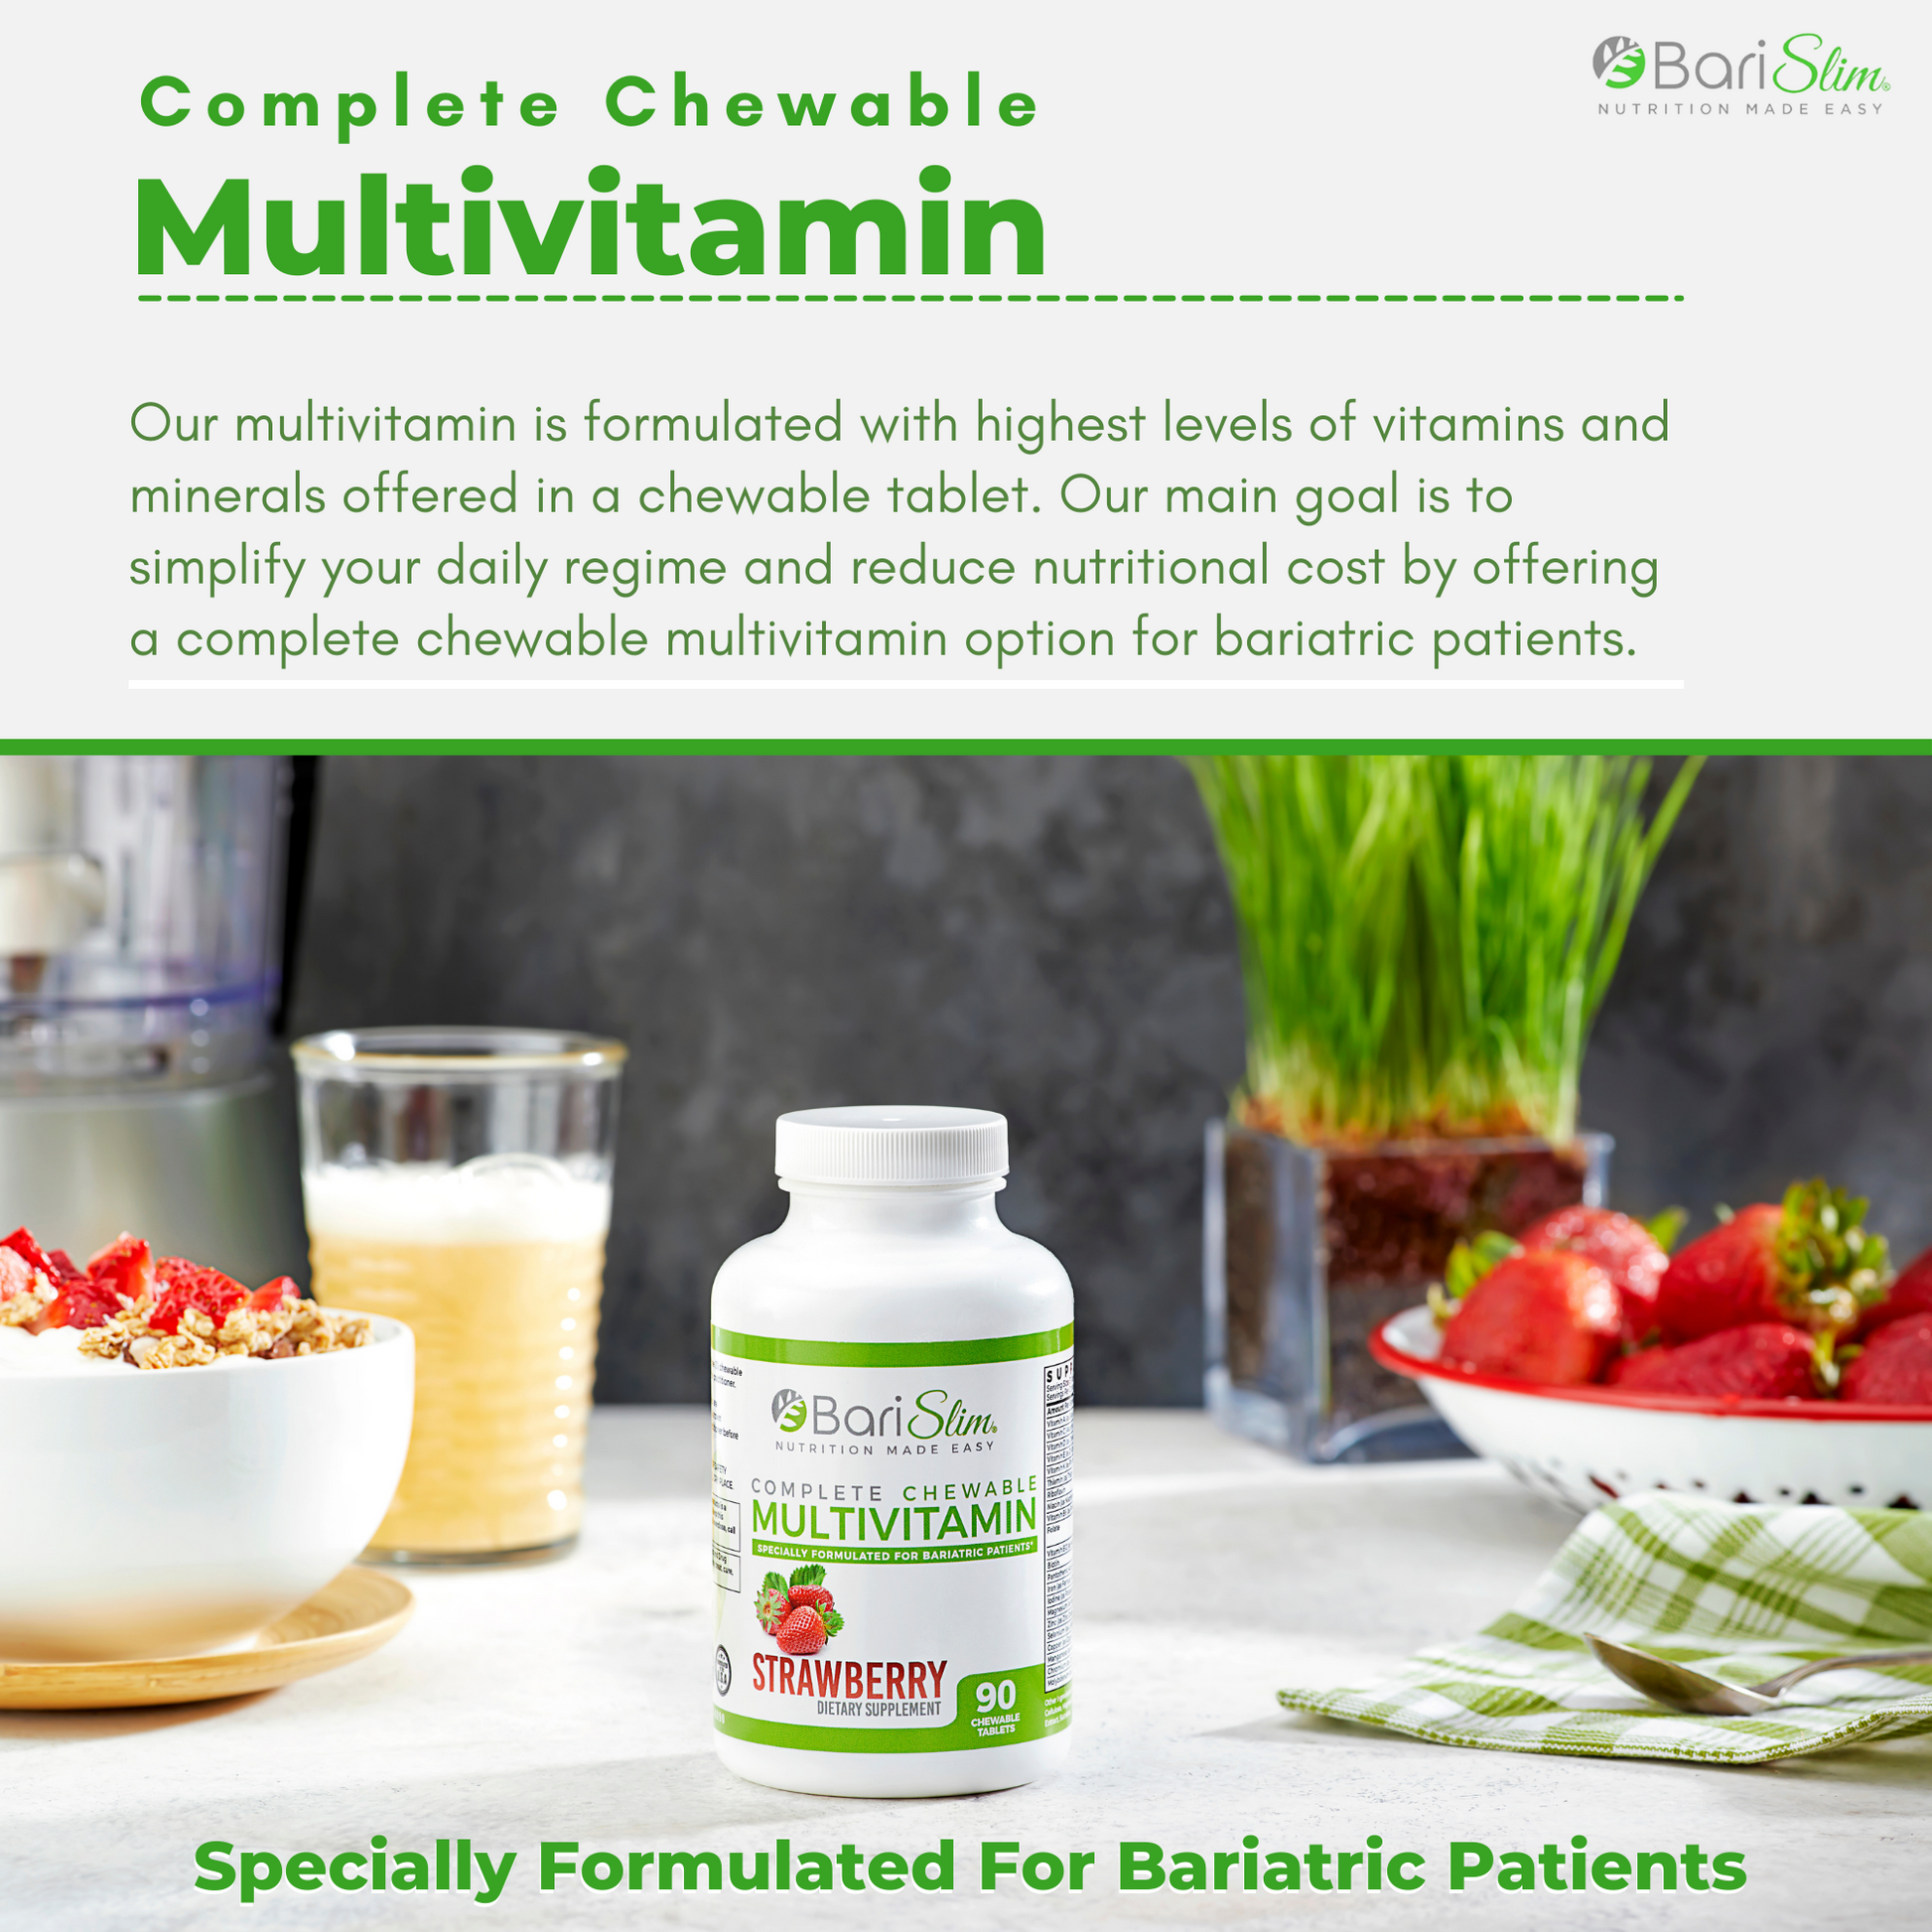 Complete chewable multivitamin for gastric bypass patients